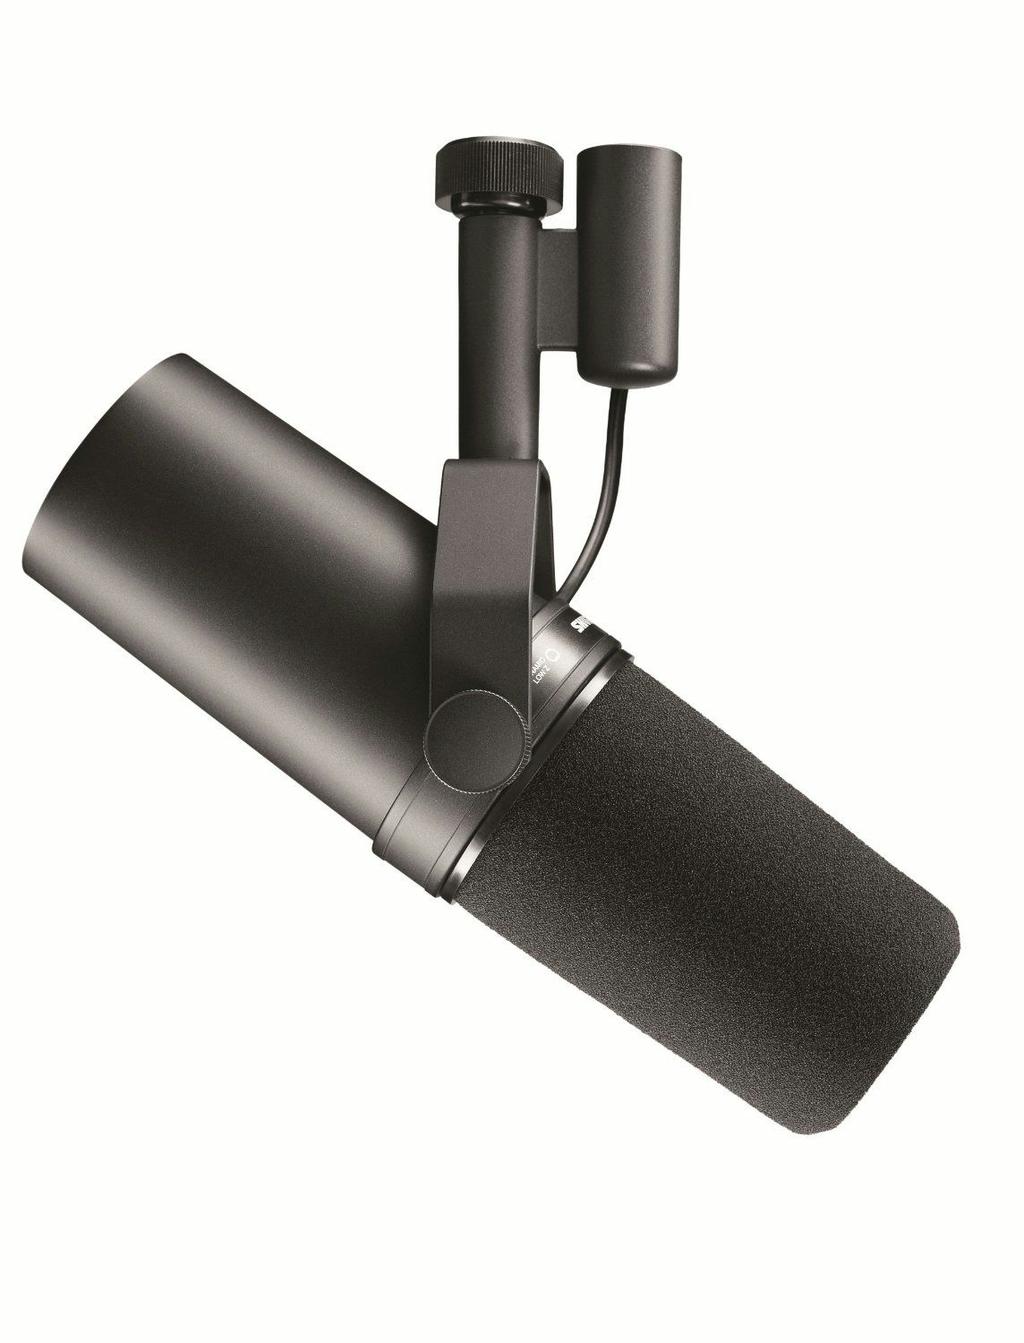 Price: $189.99 Great for: Bass instruments Overview: This large diaphragm dynamic microphone is excellent if you re trying to record some bass instruments.